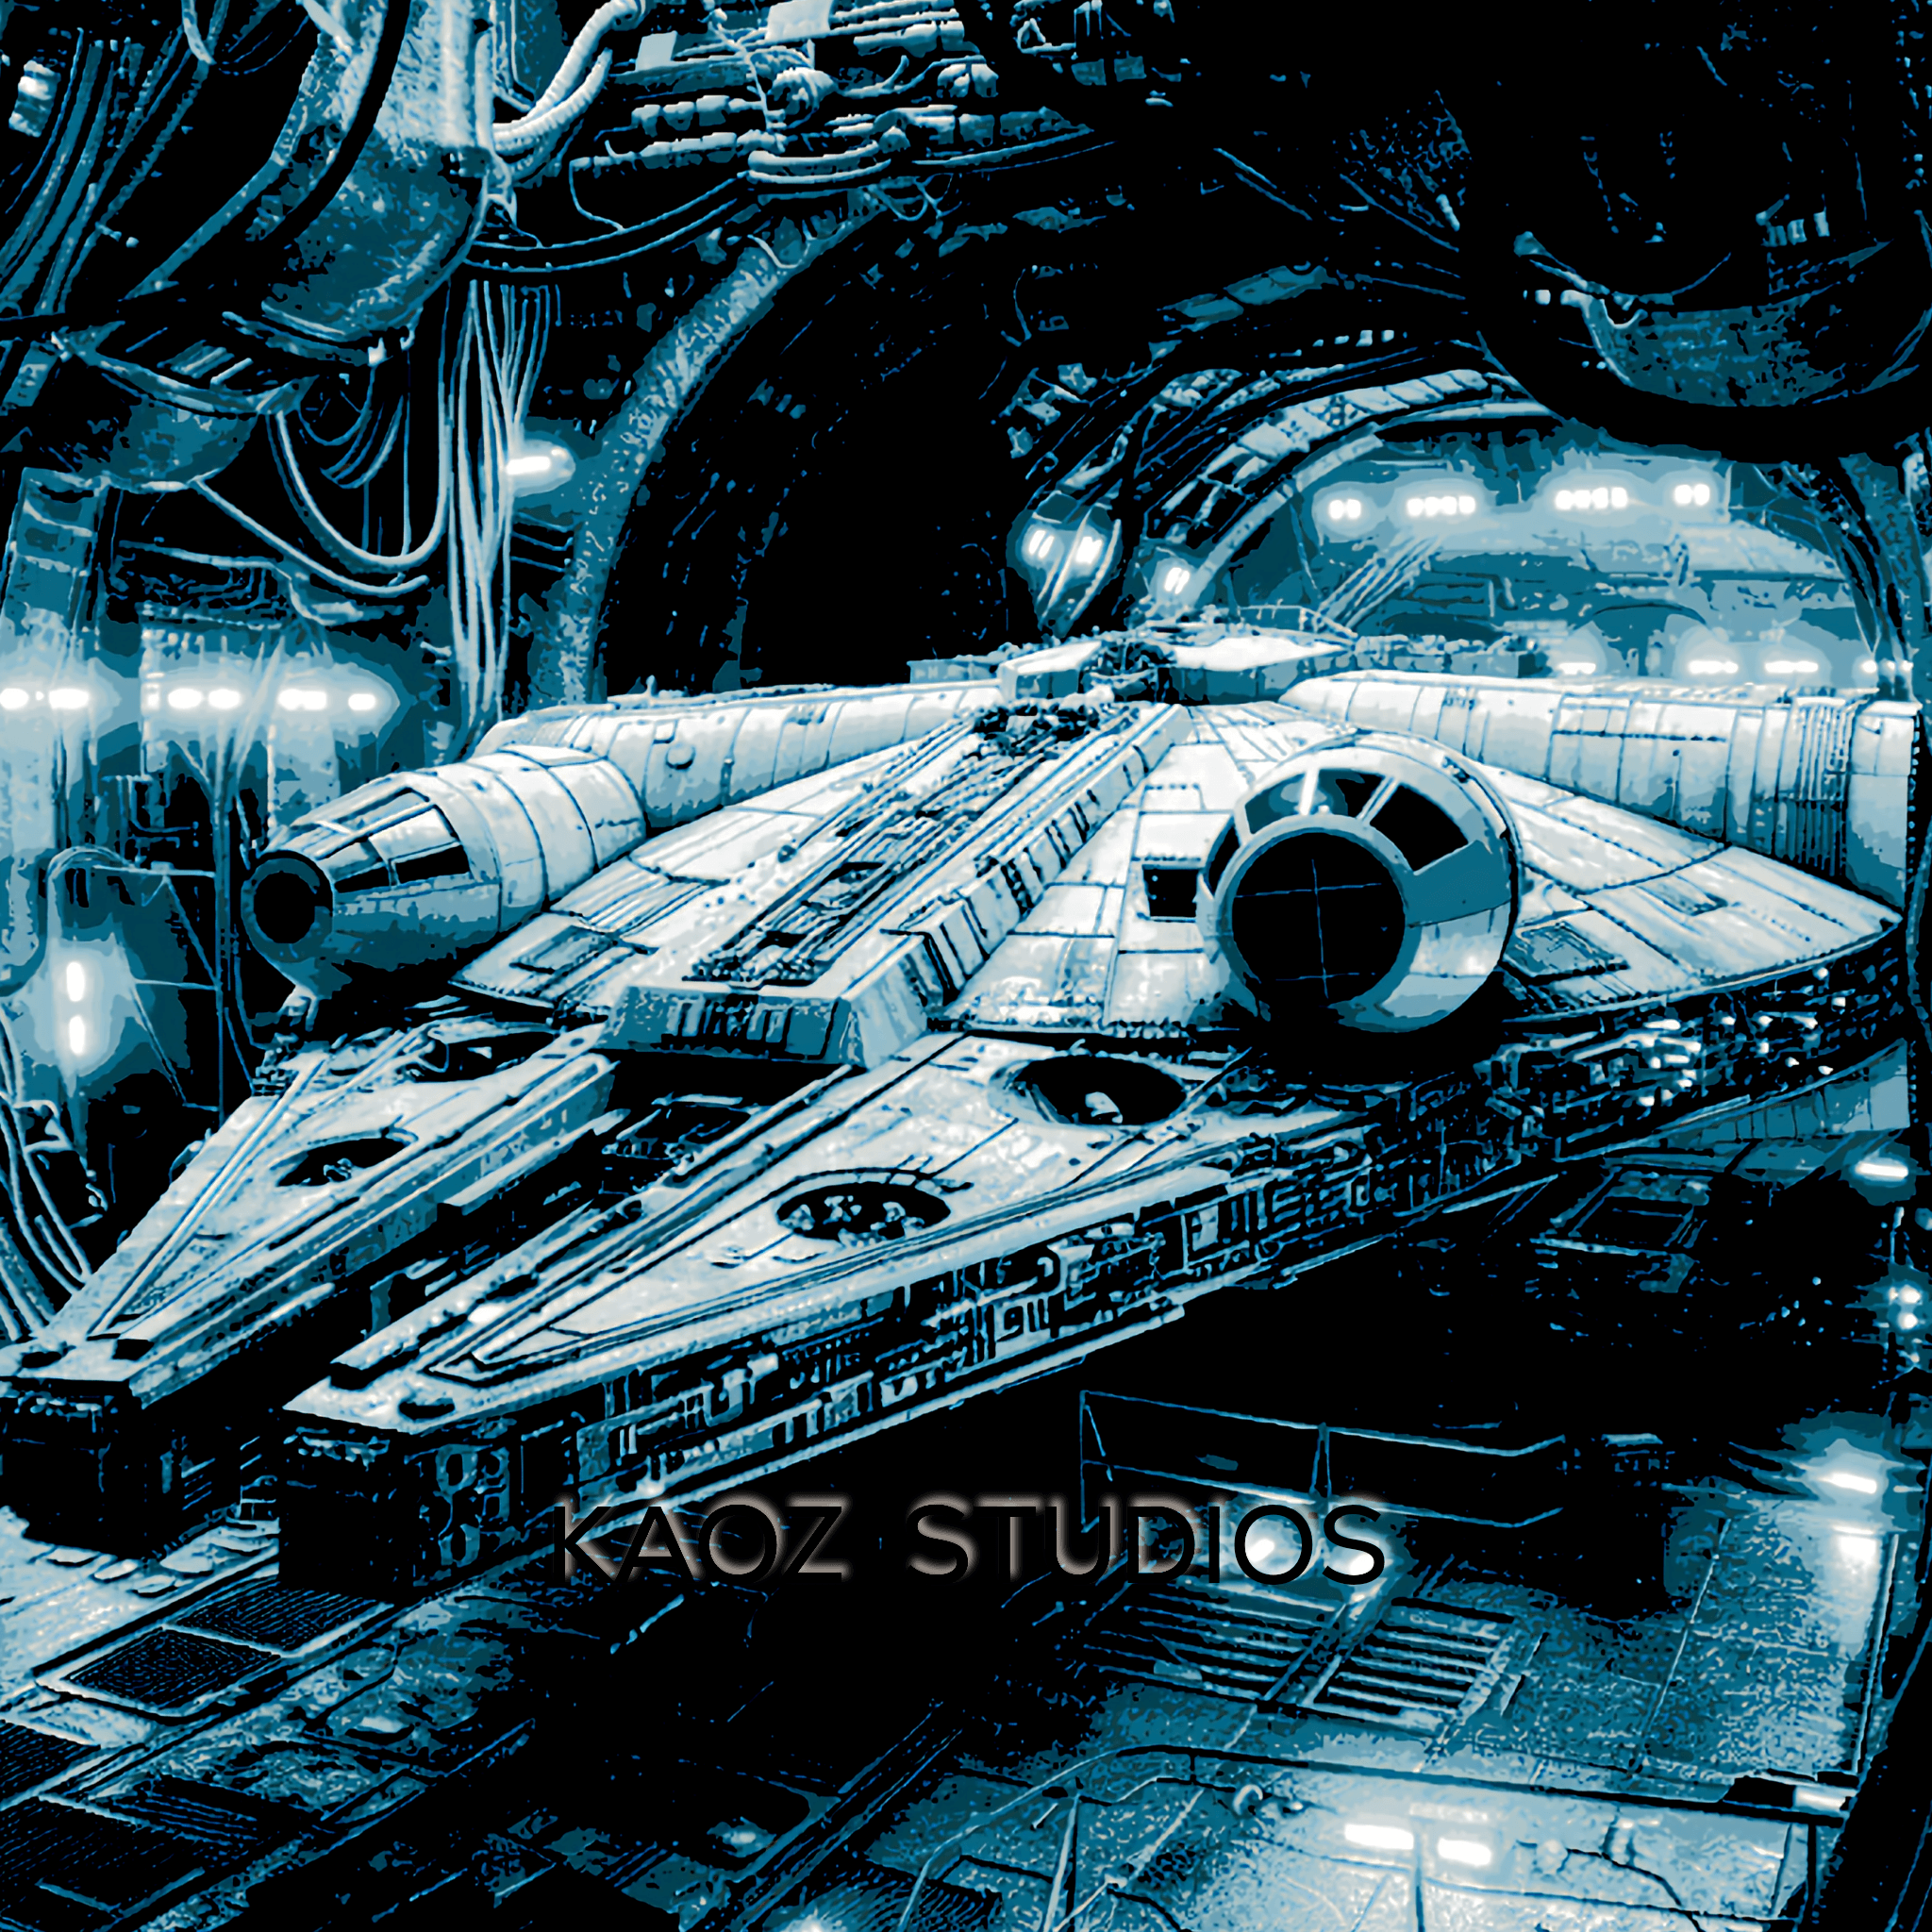 Millennium Falcon Concept Art and many more HueForge :)